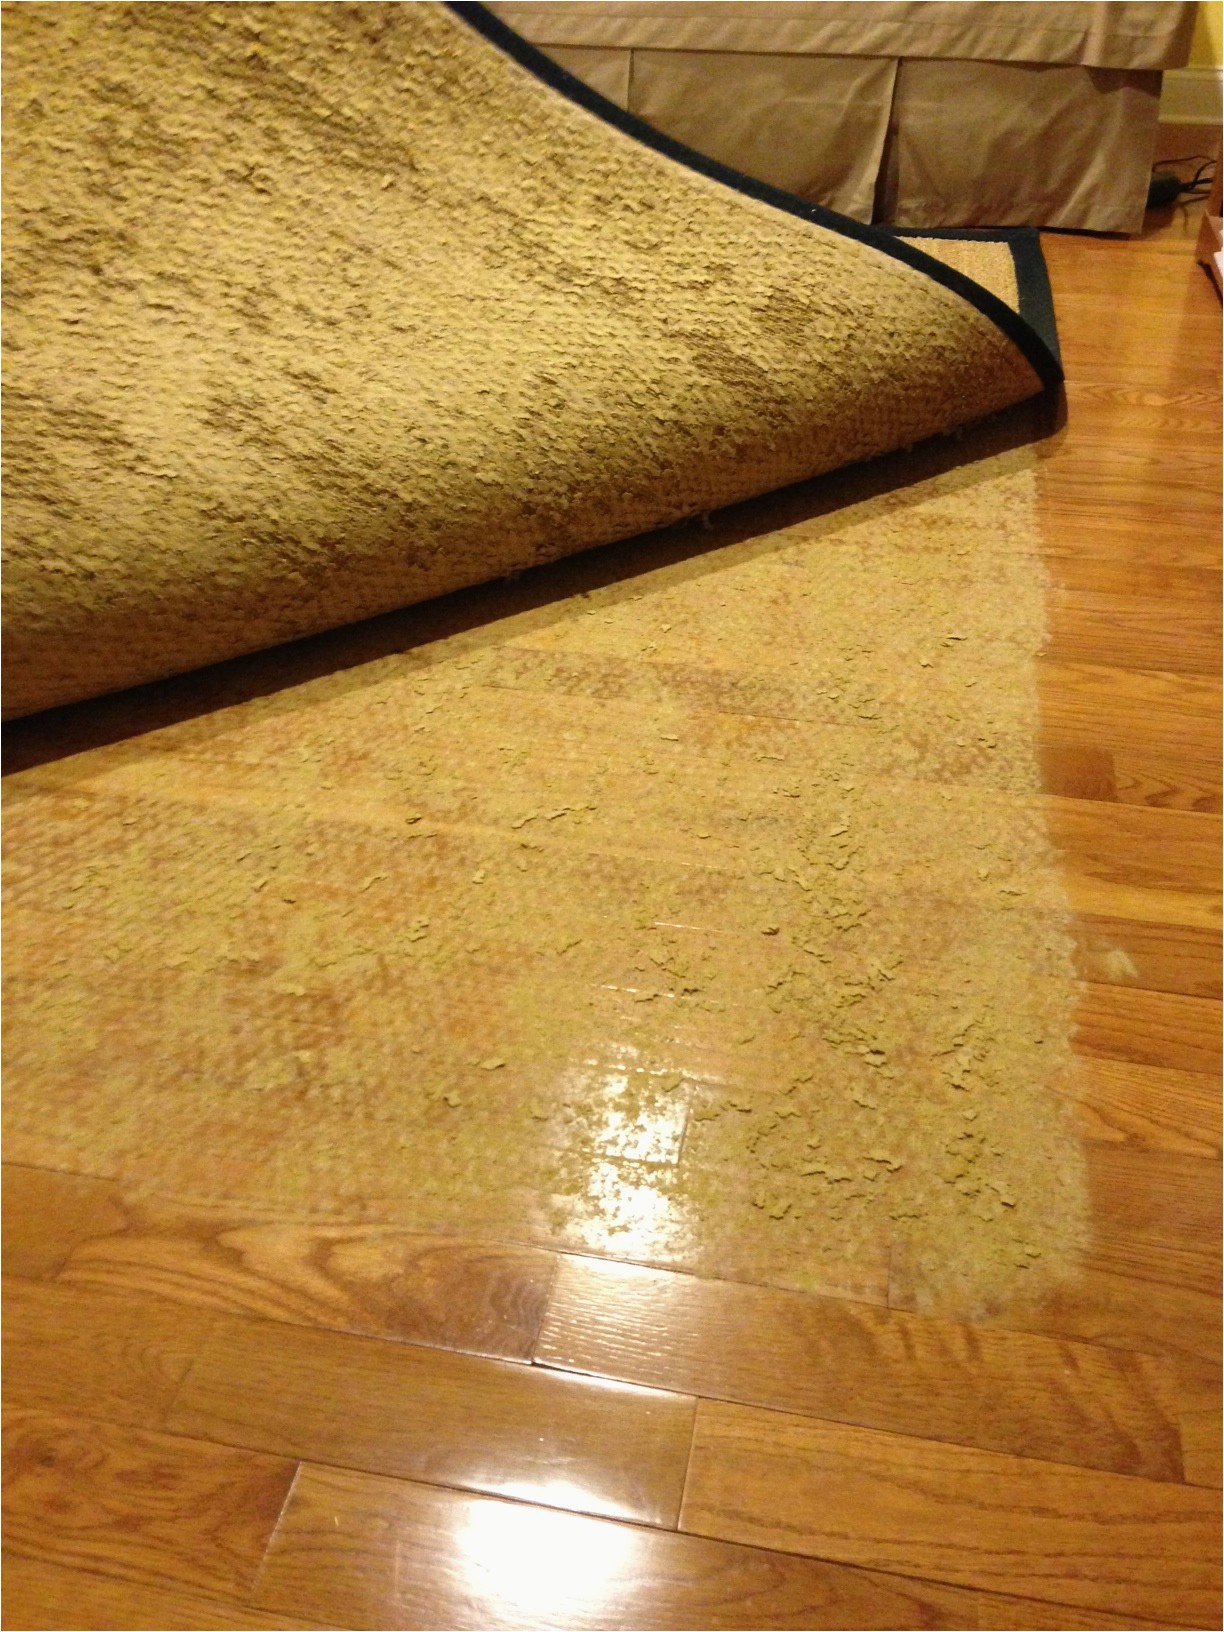 Heating Pad for Under area Rugs Latex Rug Backing Stuck to Floor